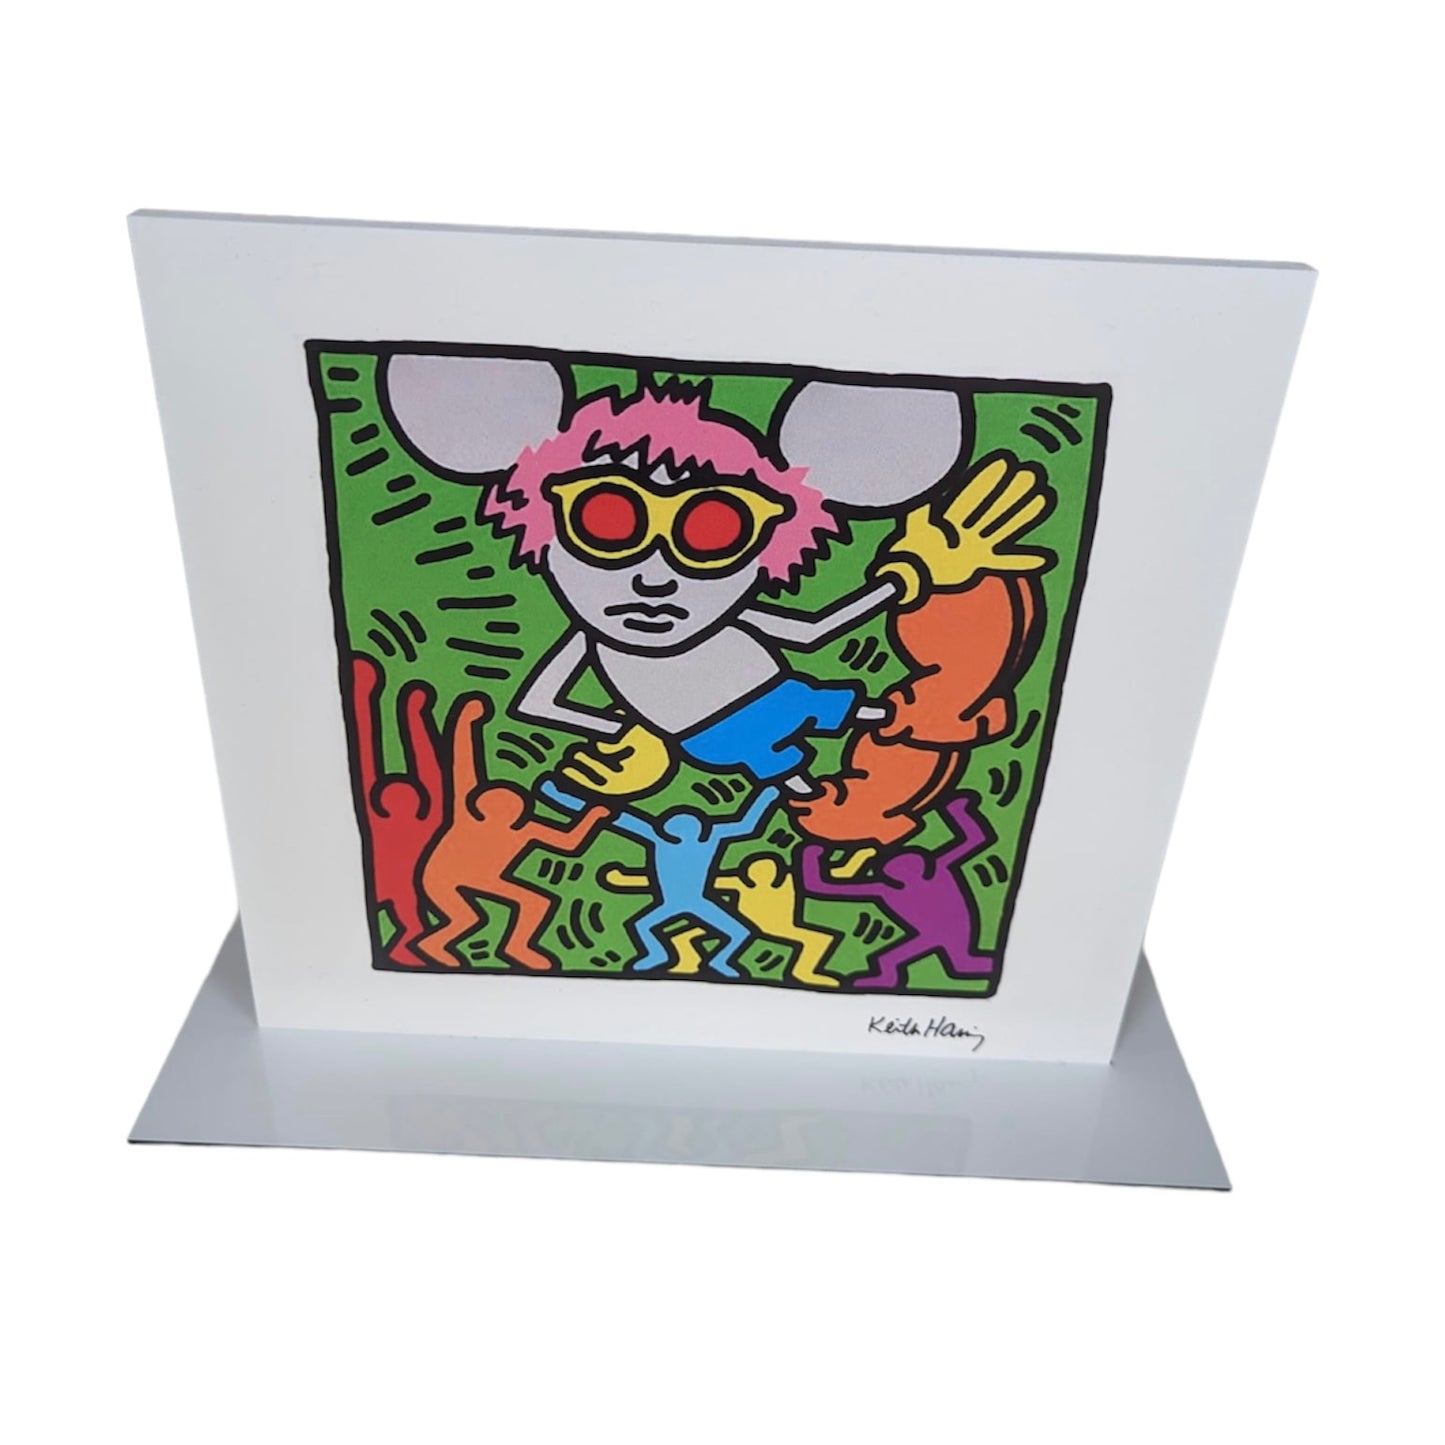 KEITH HARING Andy Mouse Print on Panel - NEW